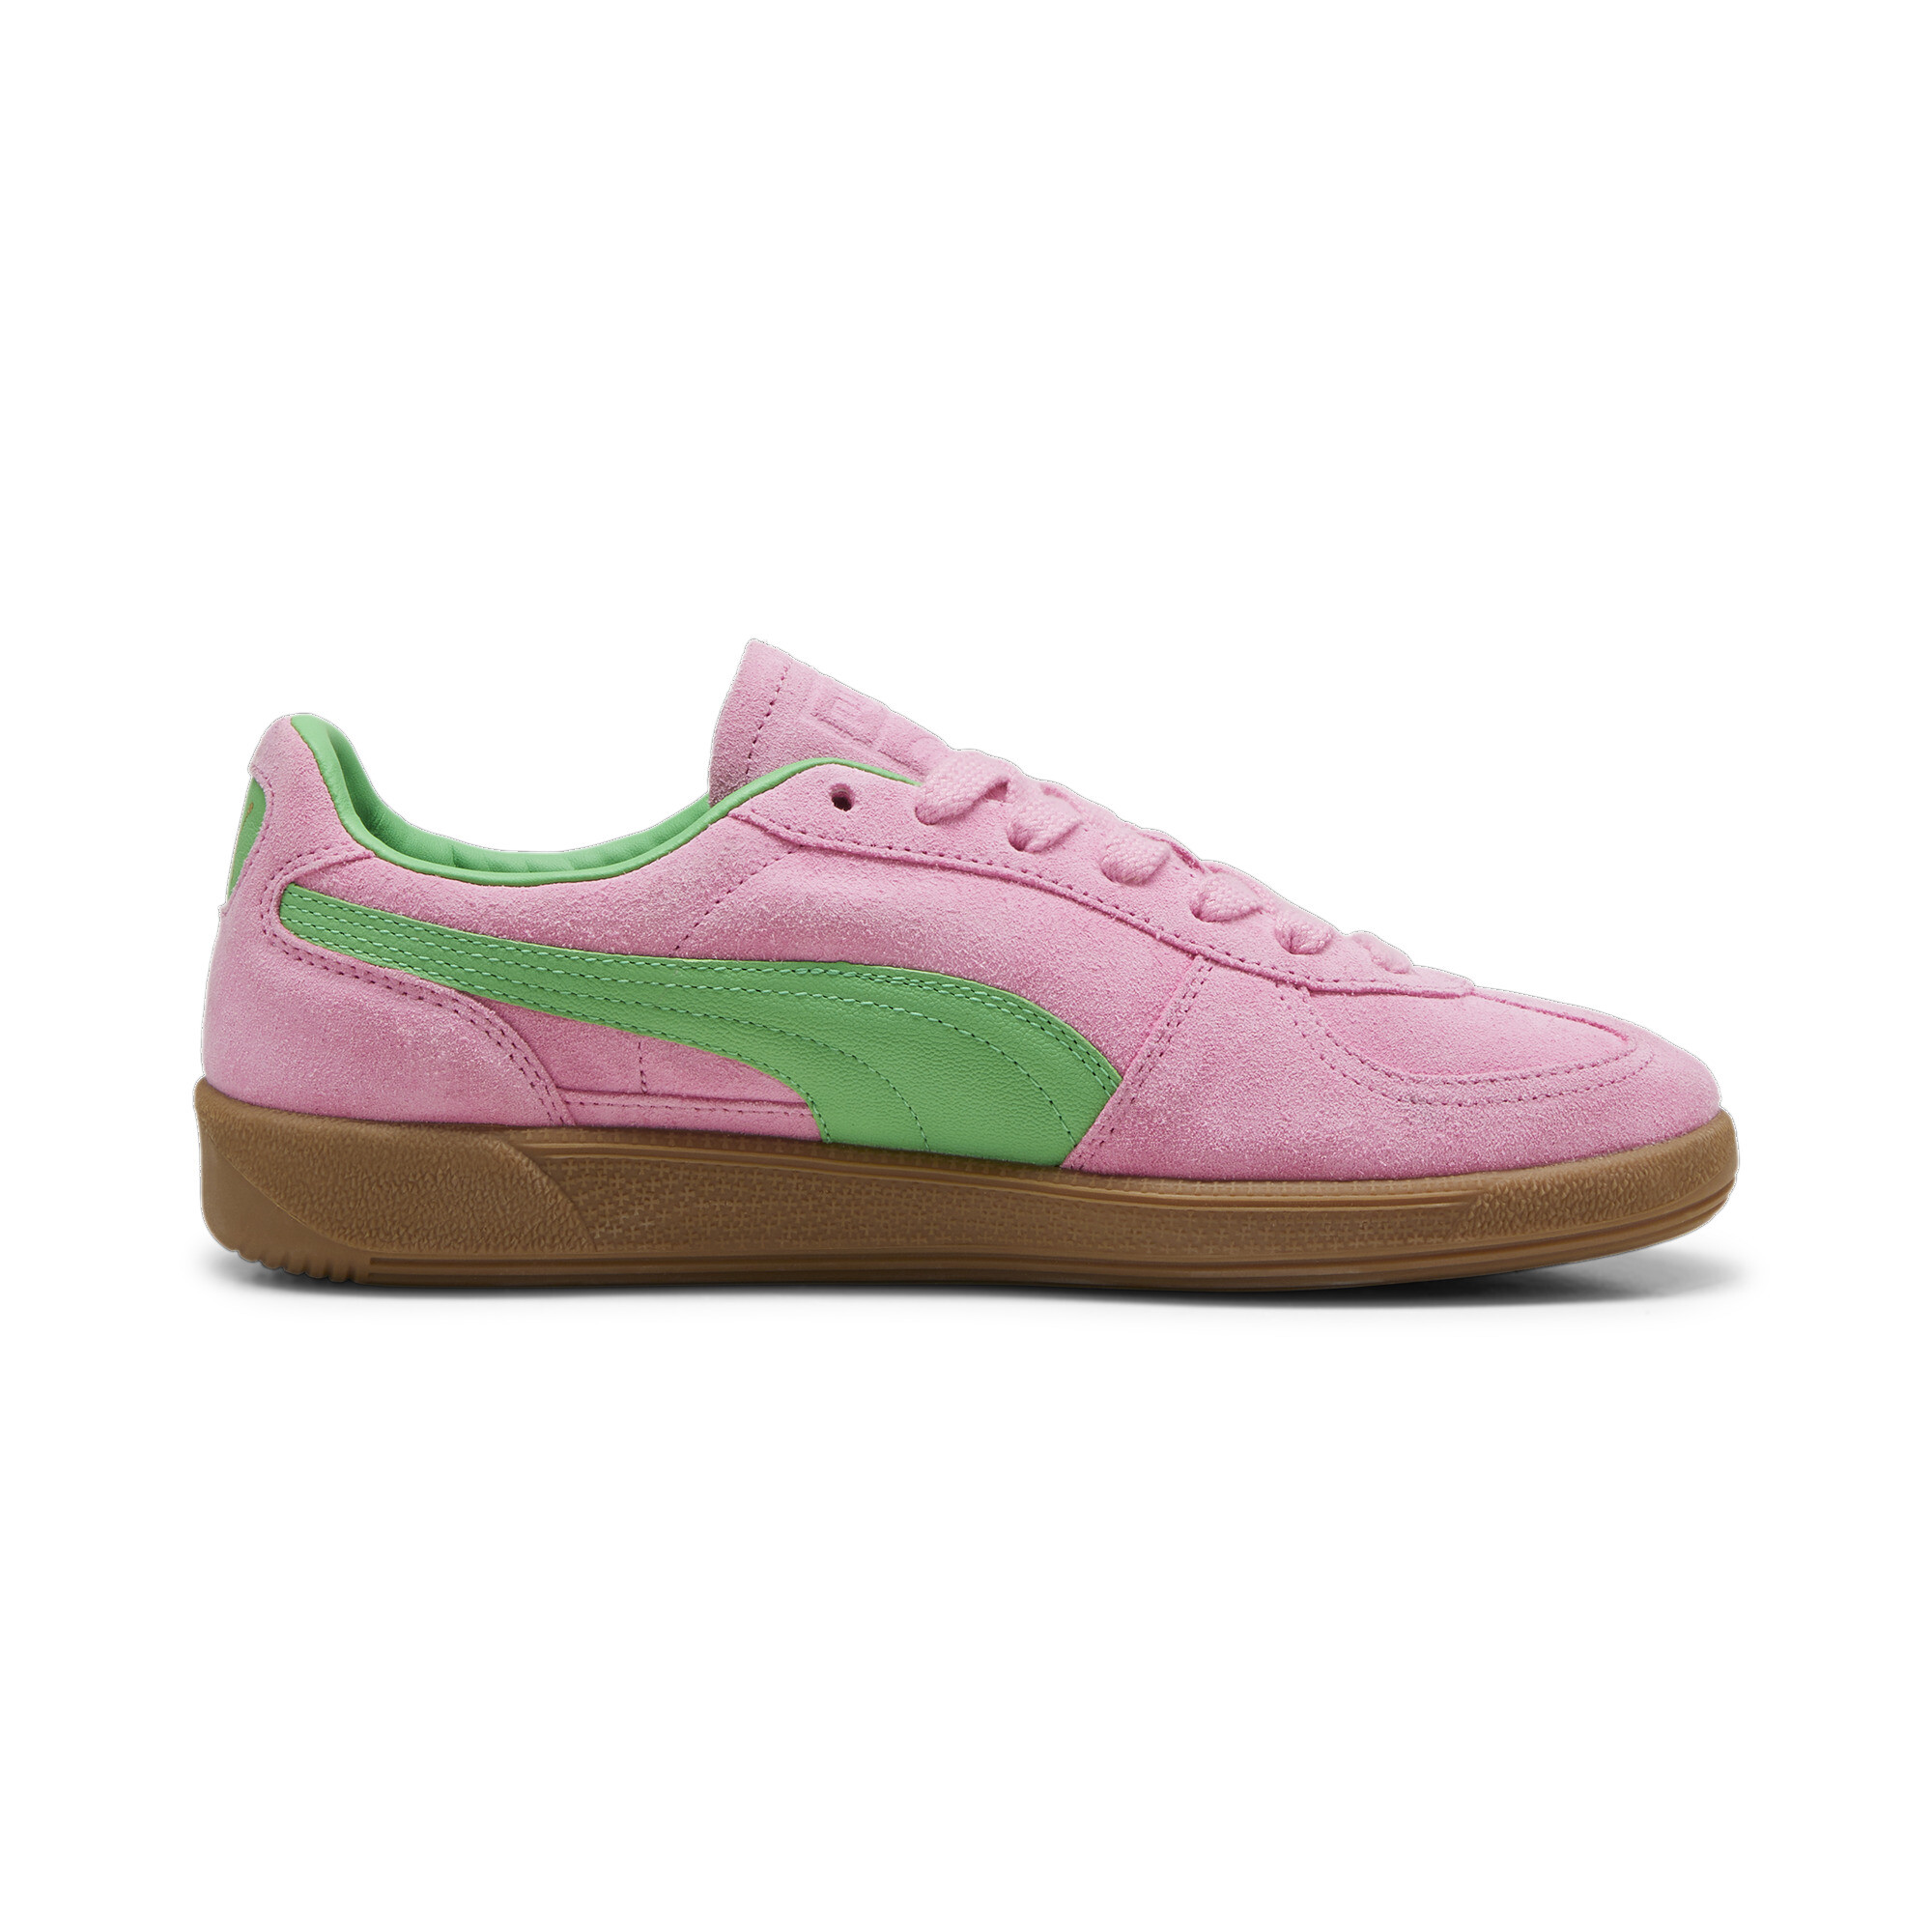 Men's PUMA Palermo Special Shoes In Pink, Size EU 45